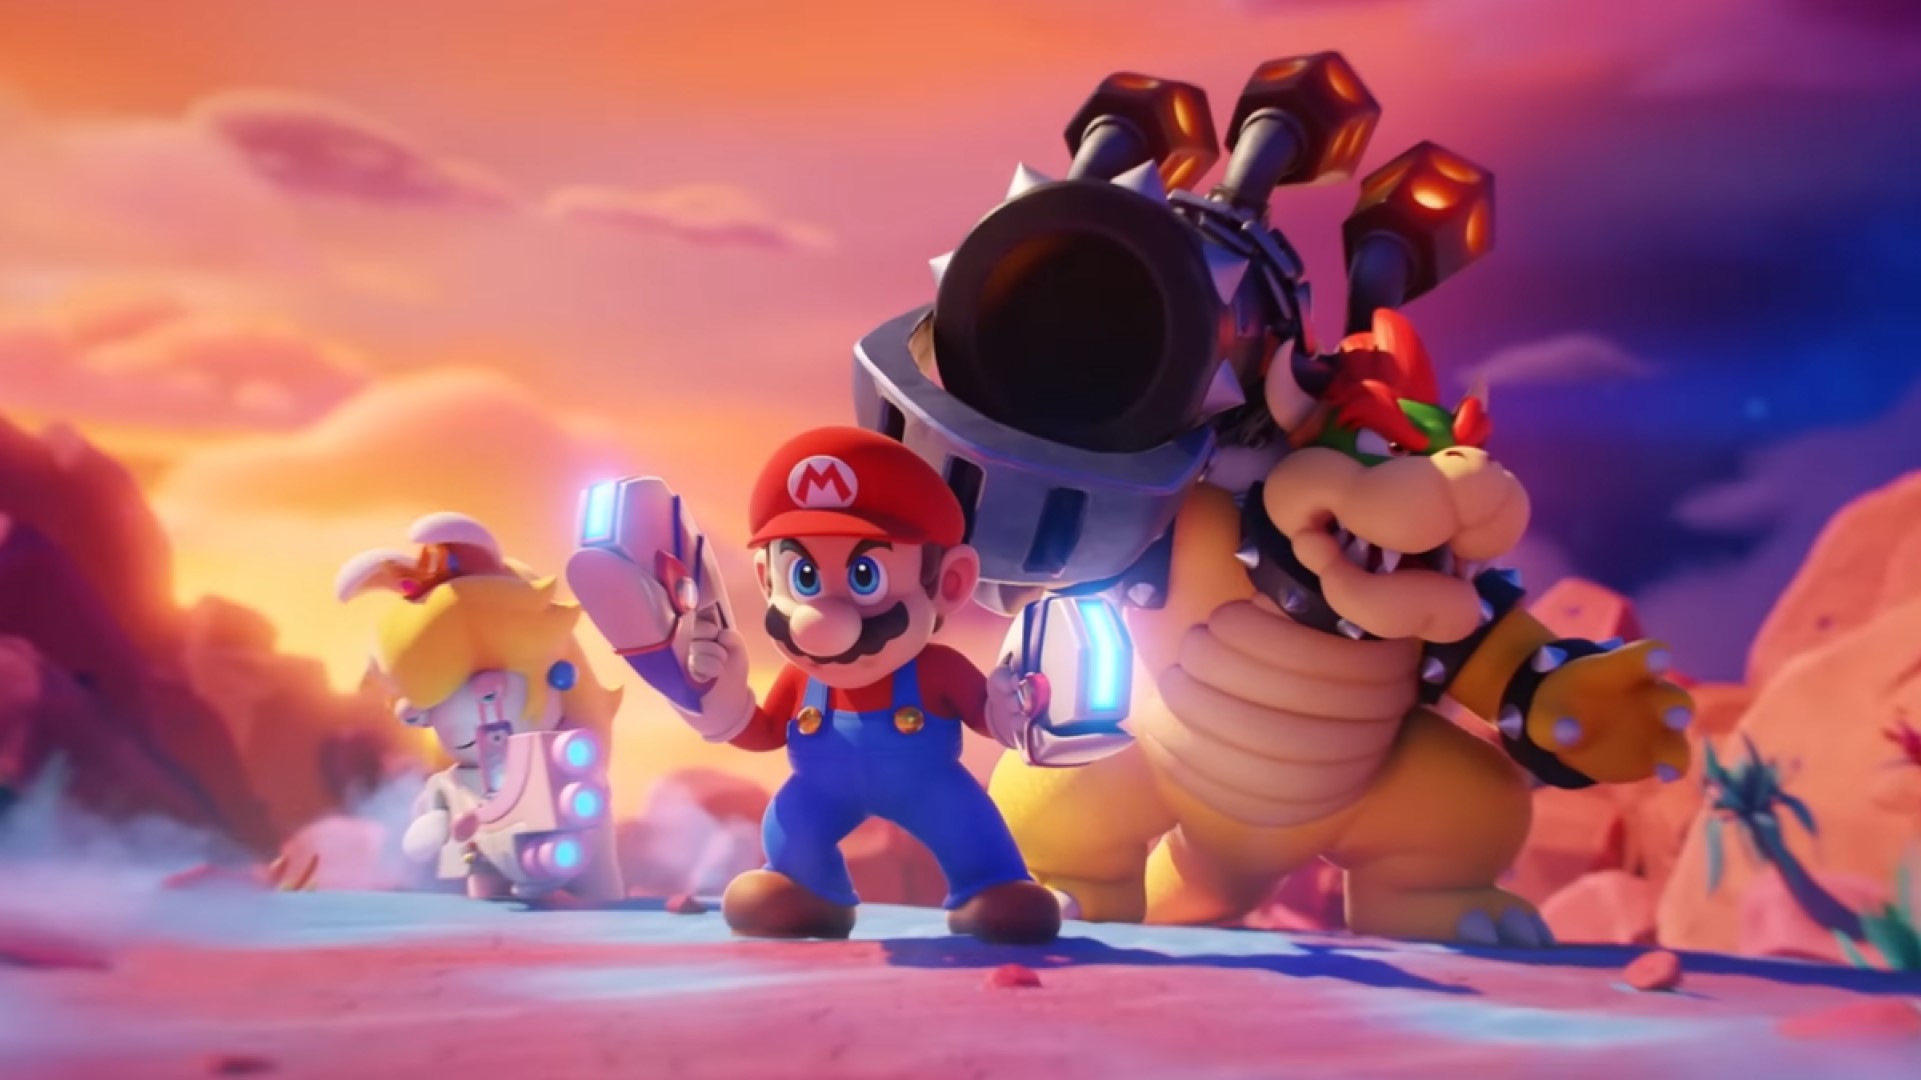 Mario + Rabbids Sparks of Hope launches this October